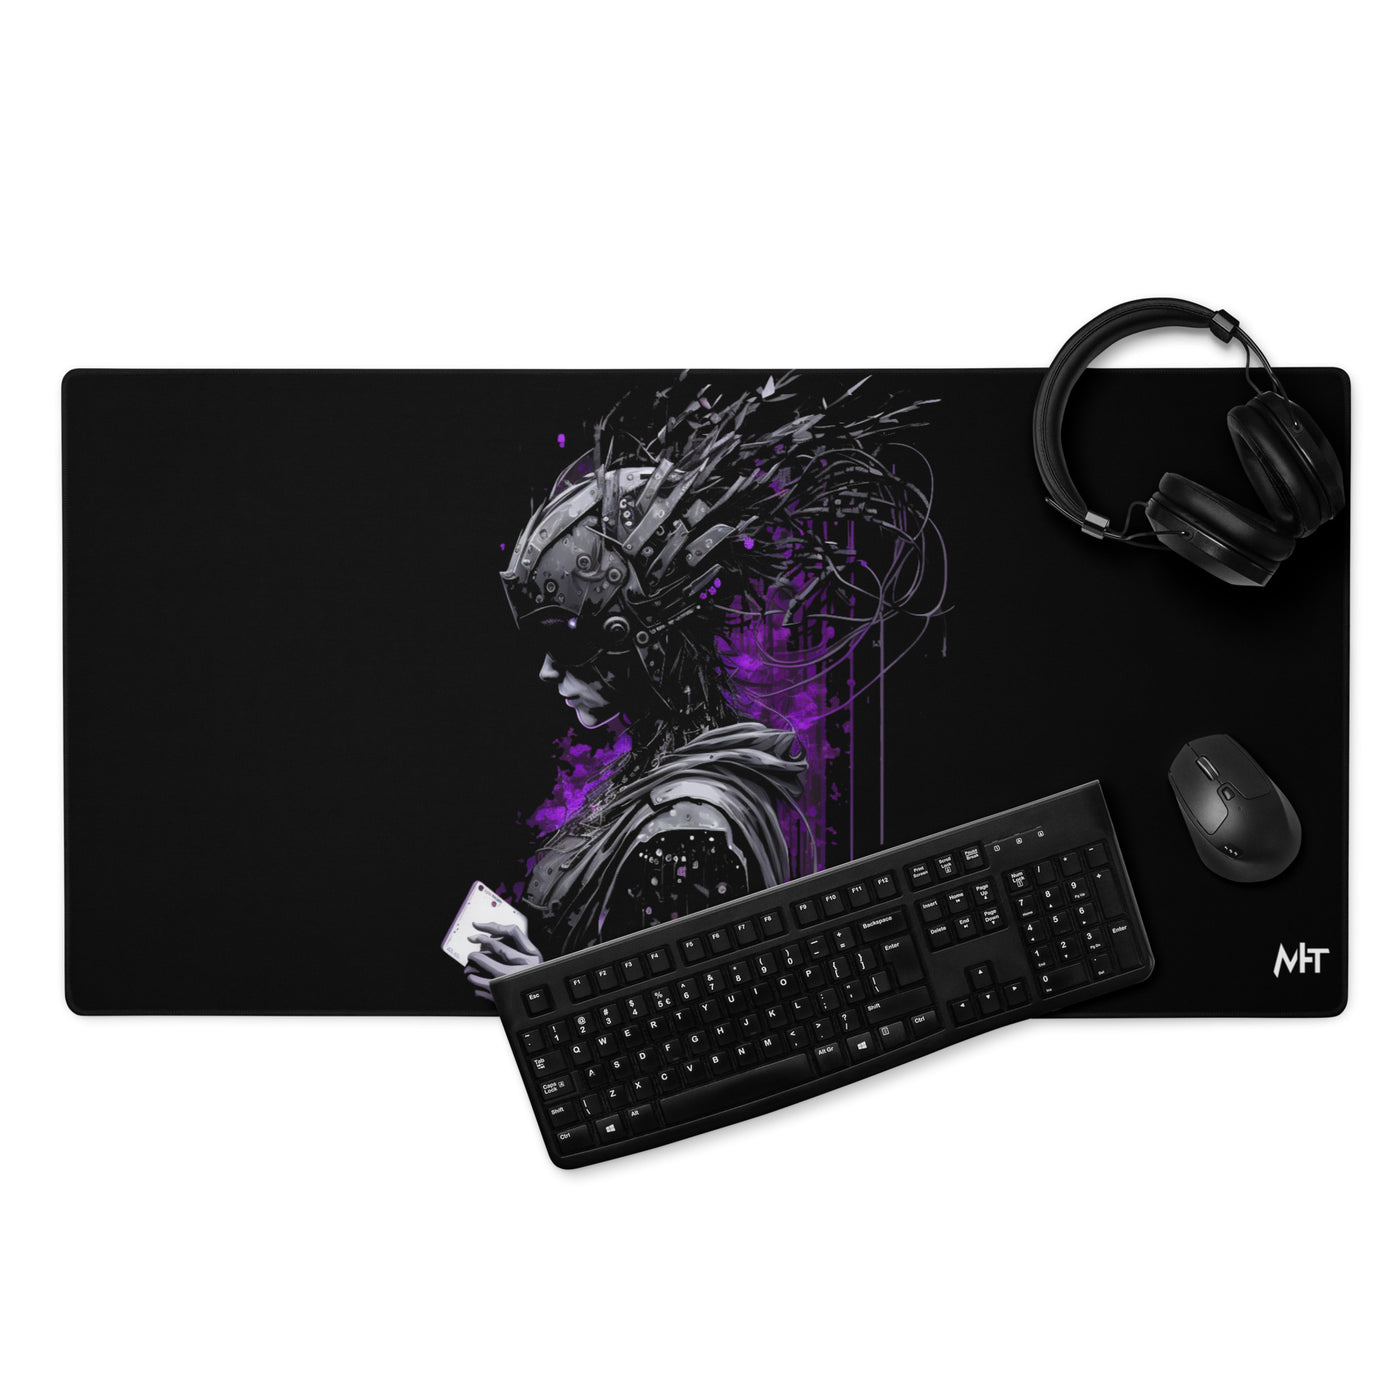 Cyberware assassin v42- Gaming mouse pad